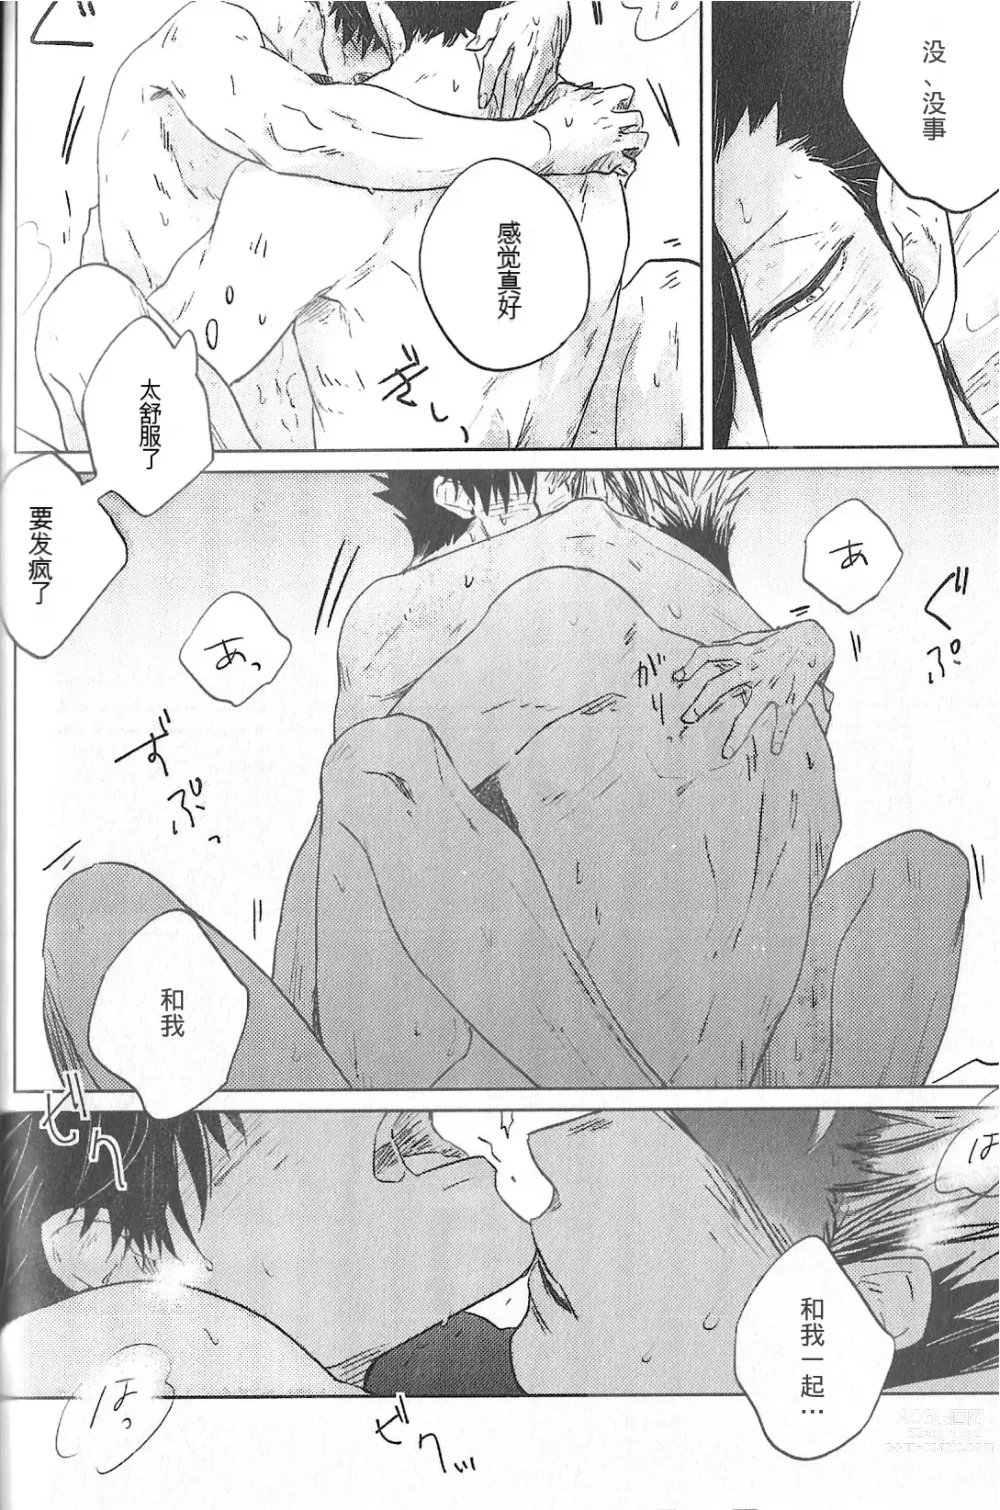 Page 9 of doujinshi 极境的野兽 后篇